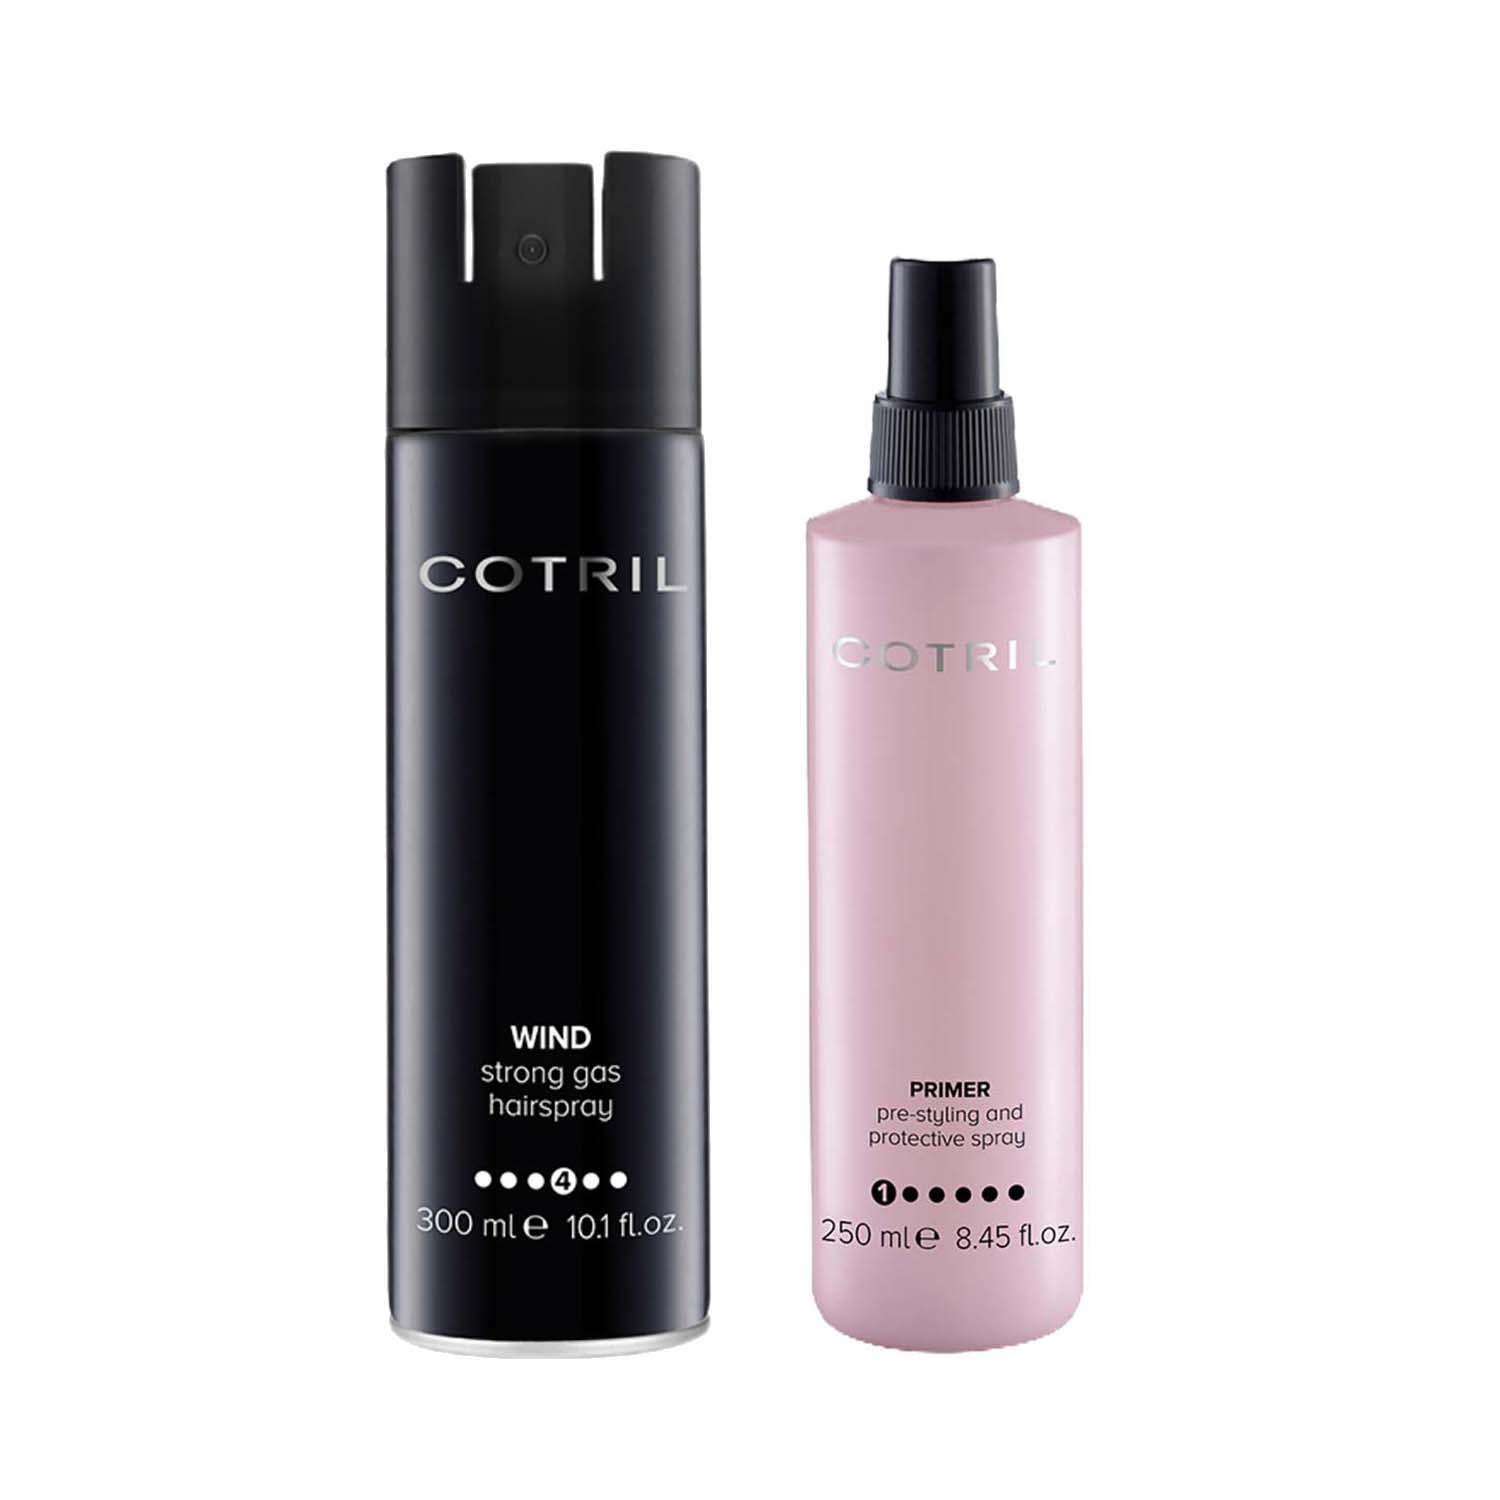 COTRIL | Cotril Primer Pre-styling and Protective Spray (250 ml) + Wind Strong Gas Hairspray (300 ml) Combo